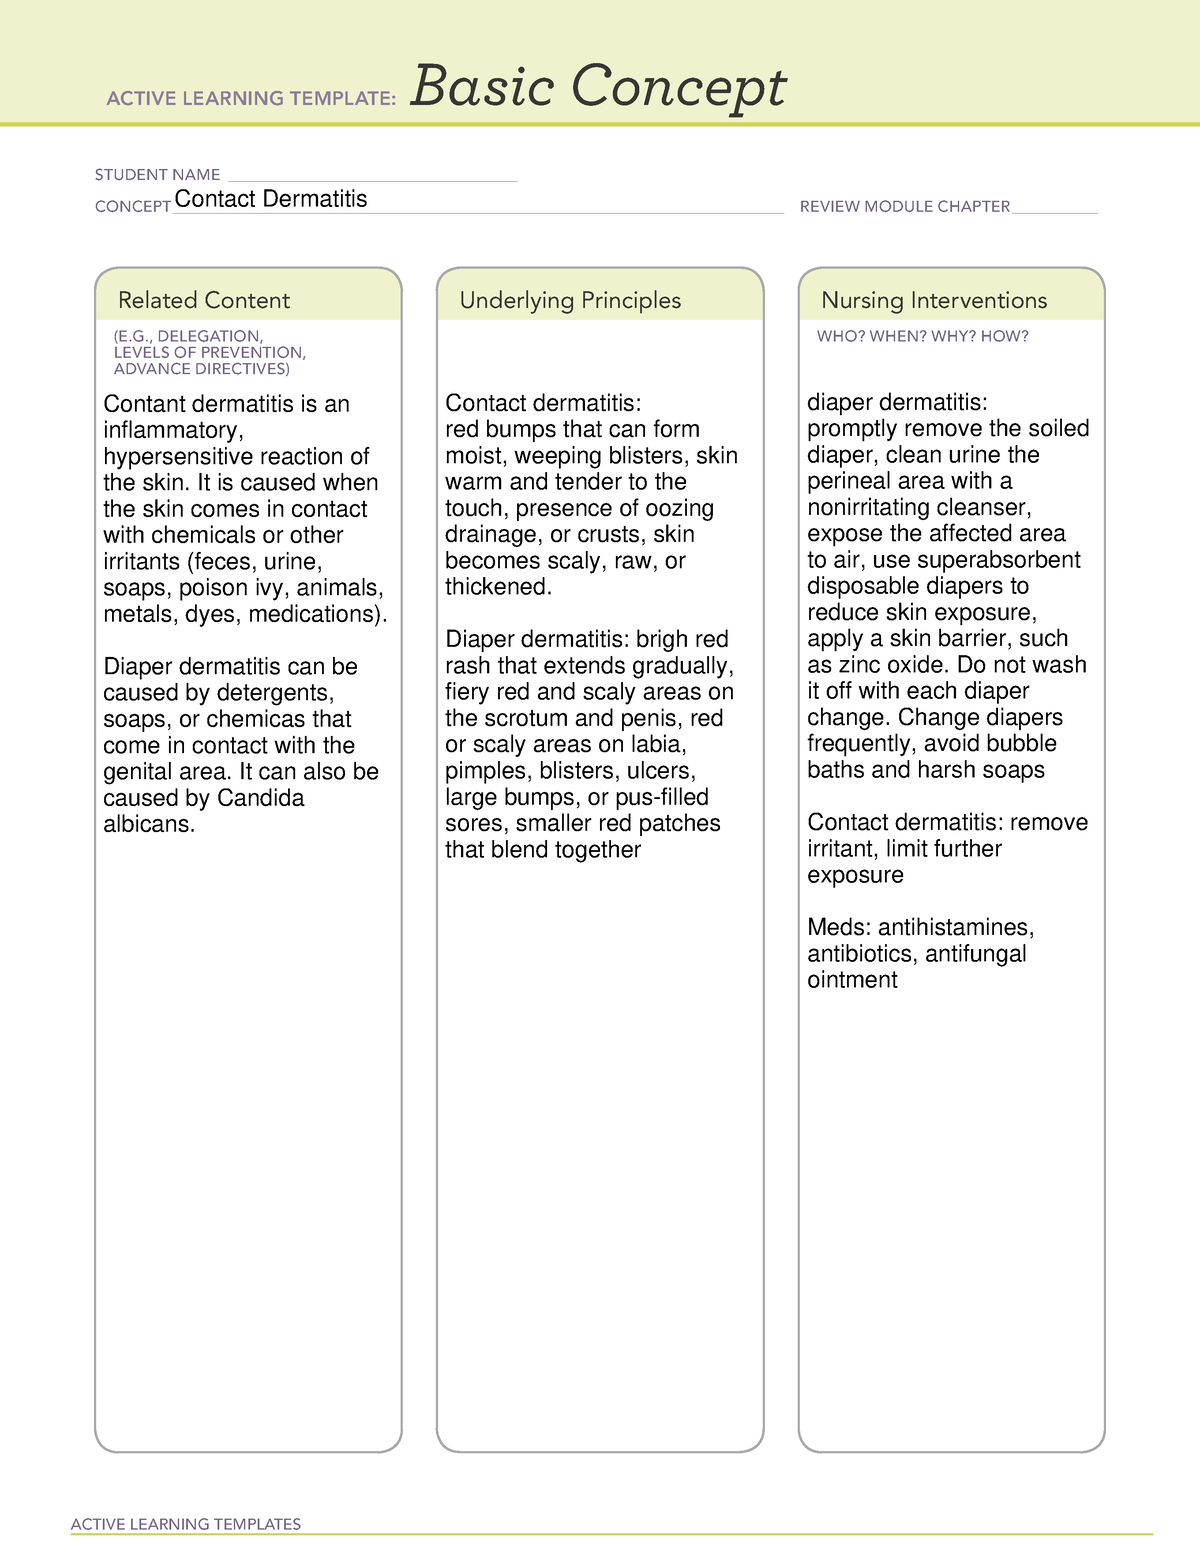 peds-contact-dermatitis-ati-practice-a-active-learning-templates